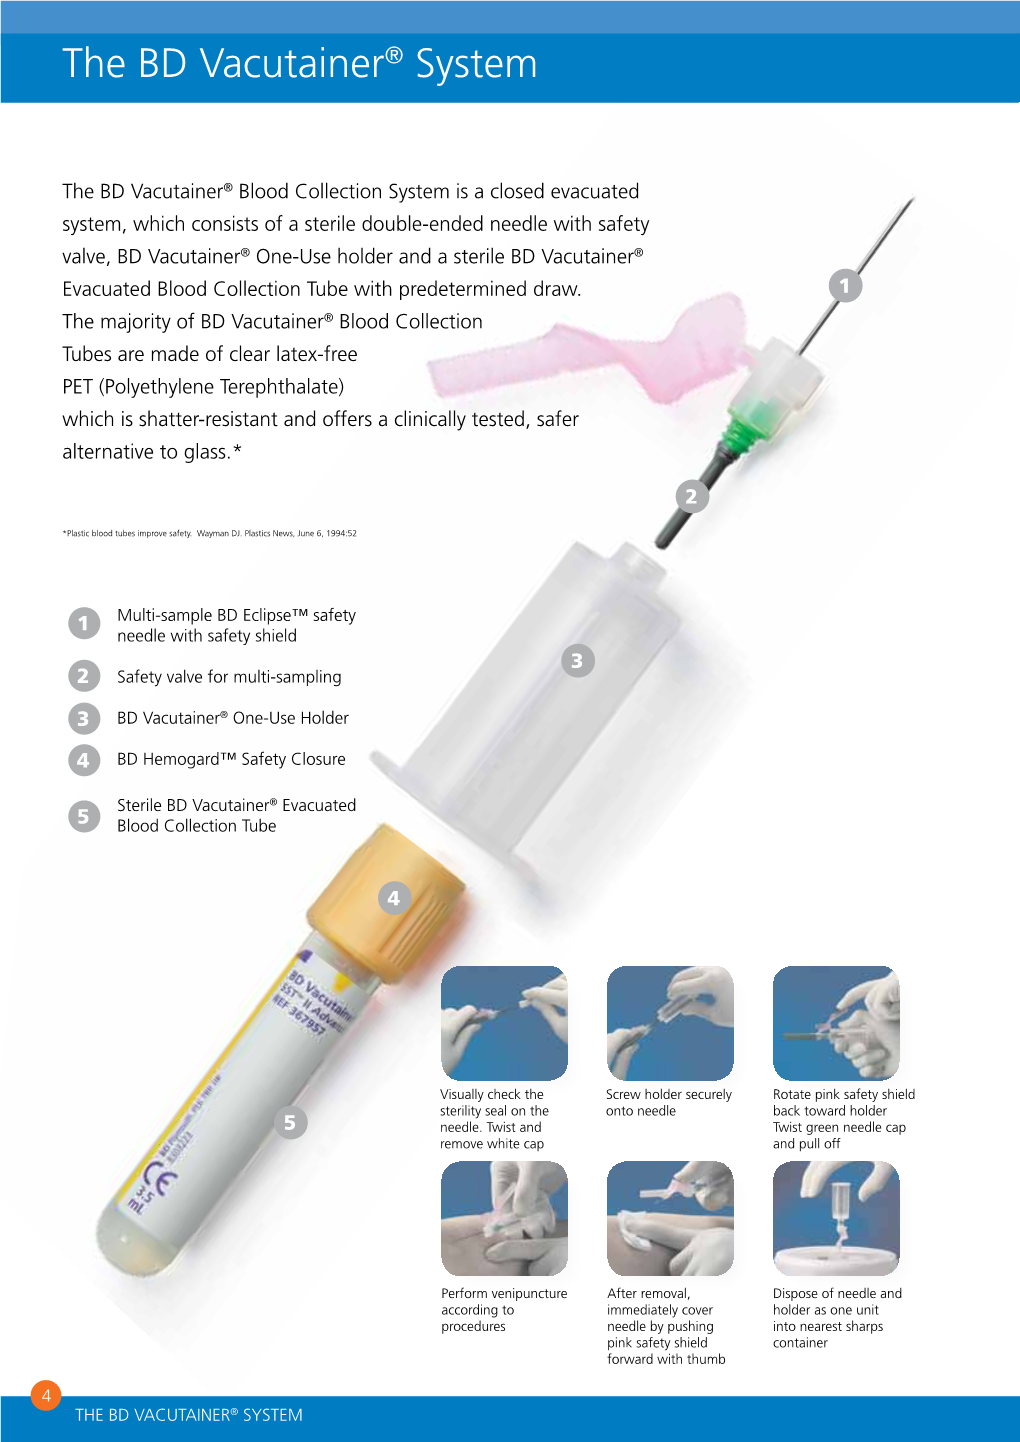 The BD Vacutainer® System